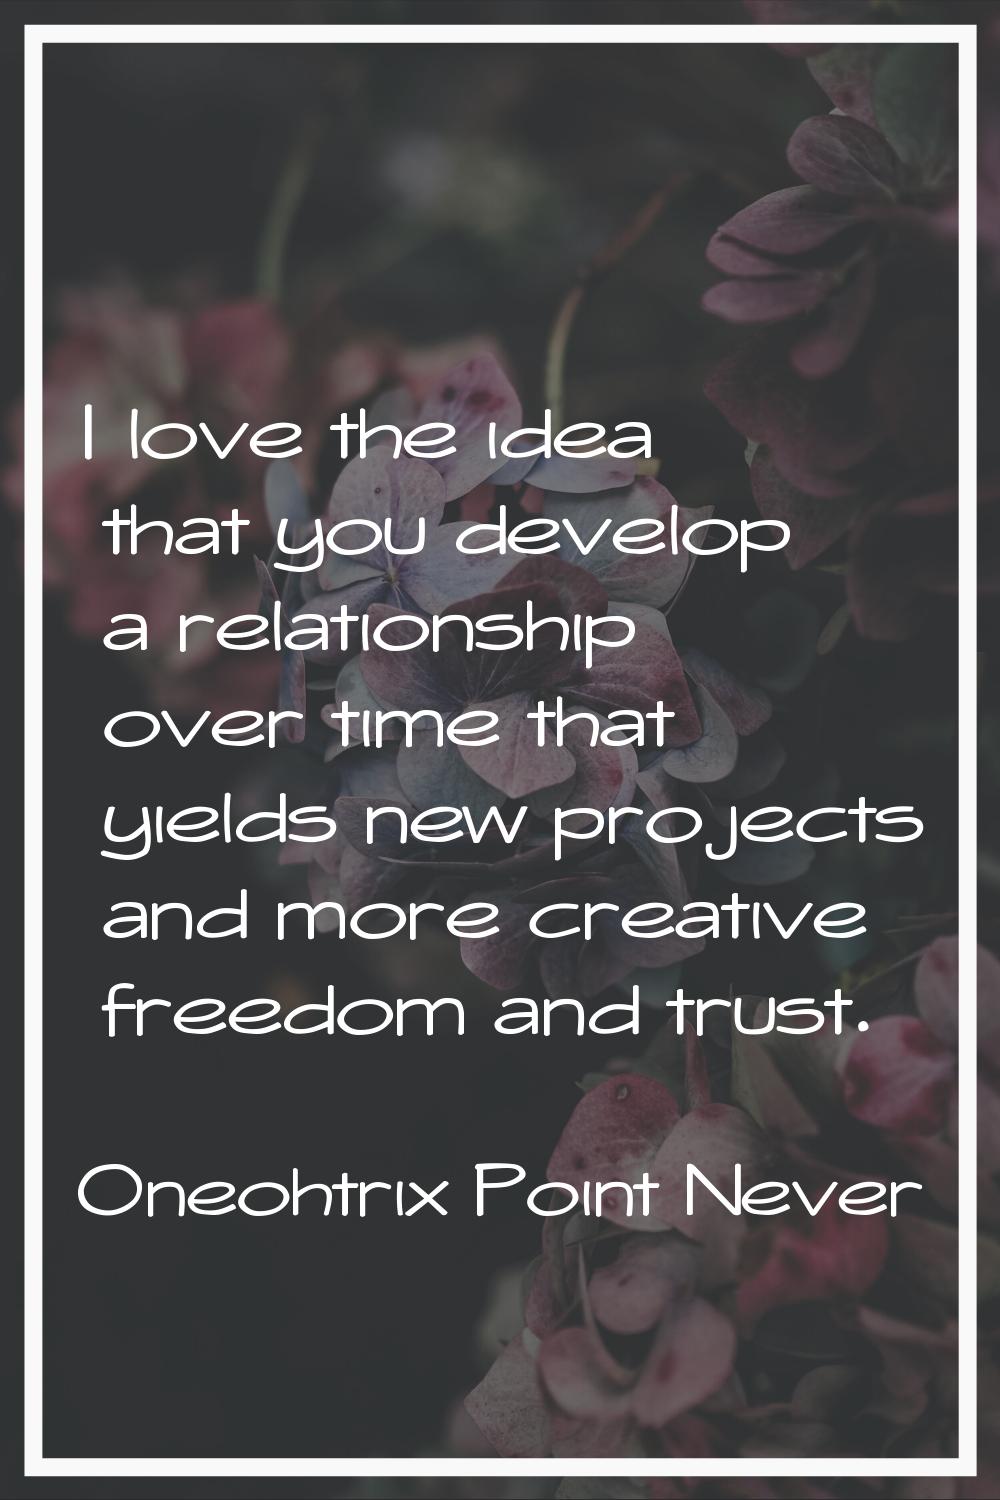 I love the idea that you develop a relationship over time that yields new projects and more creativ